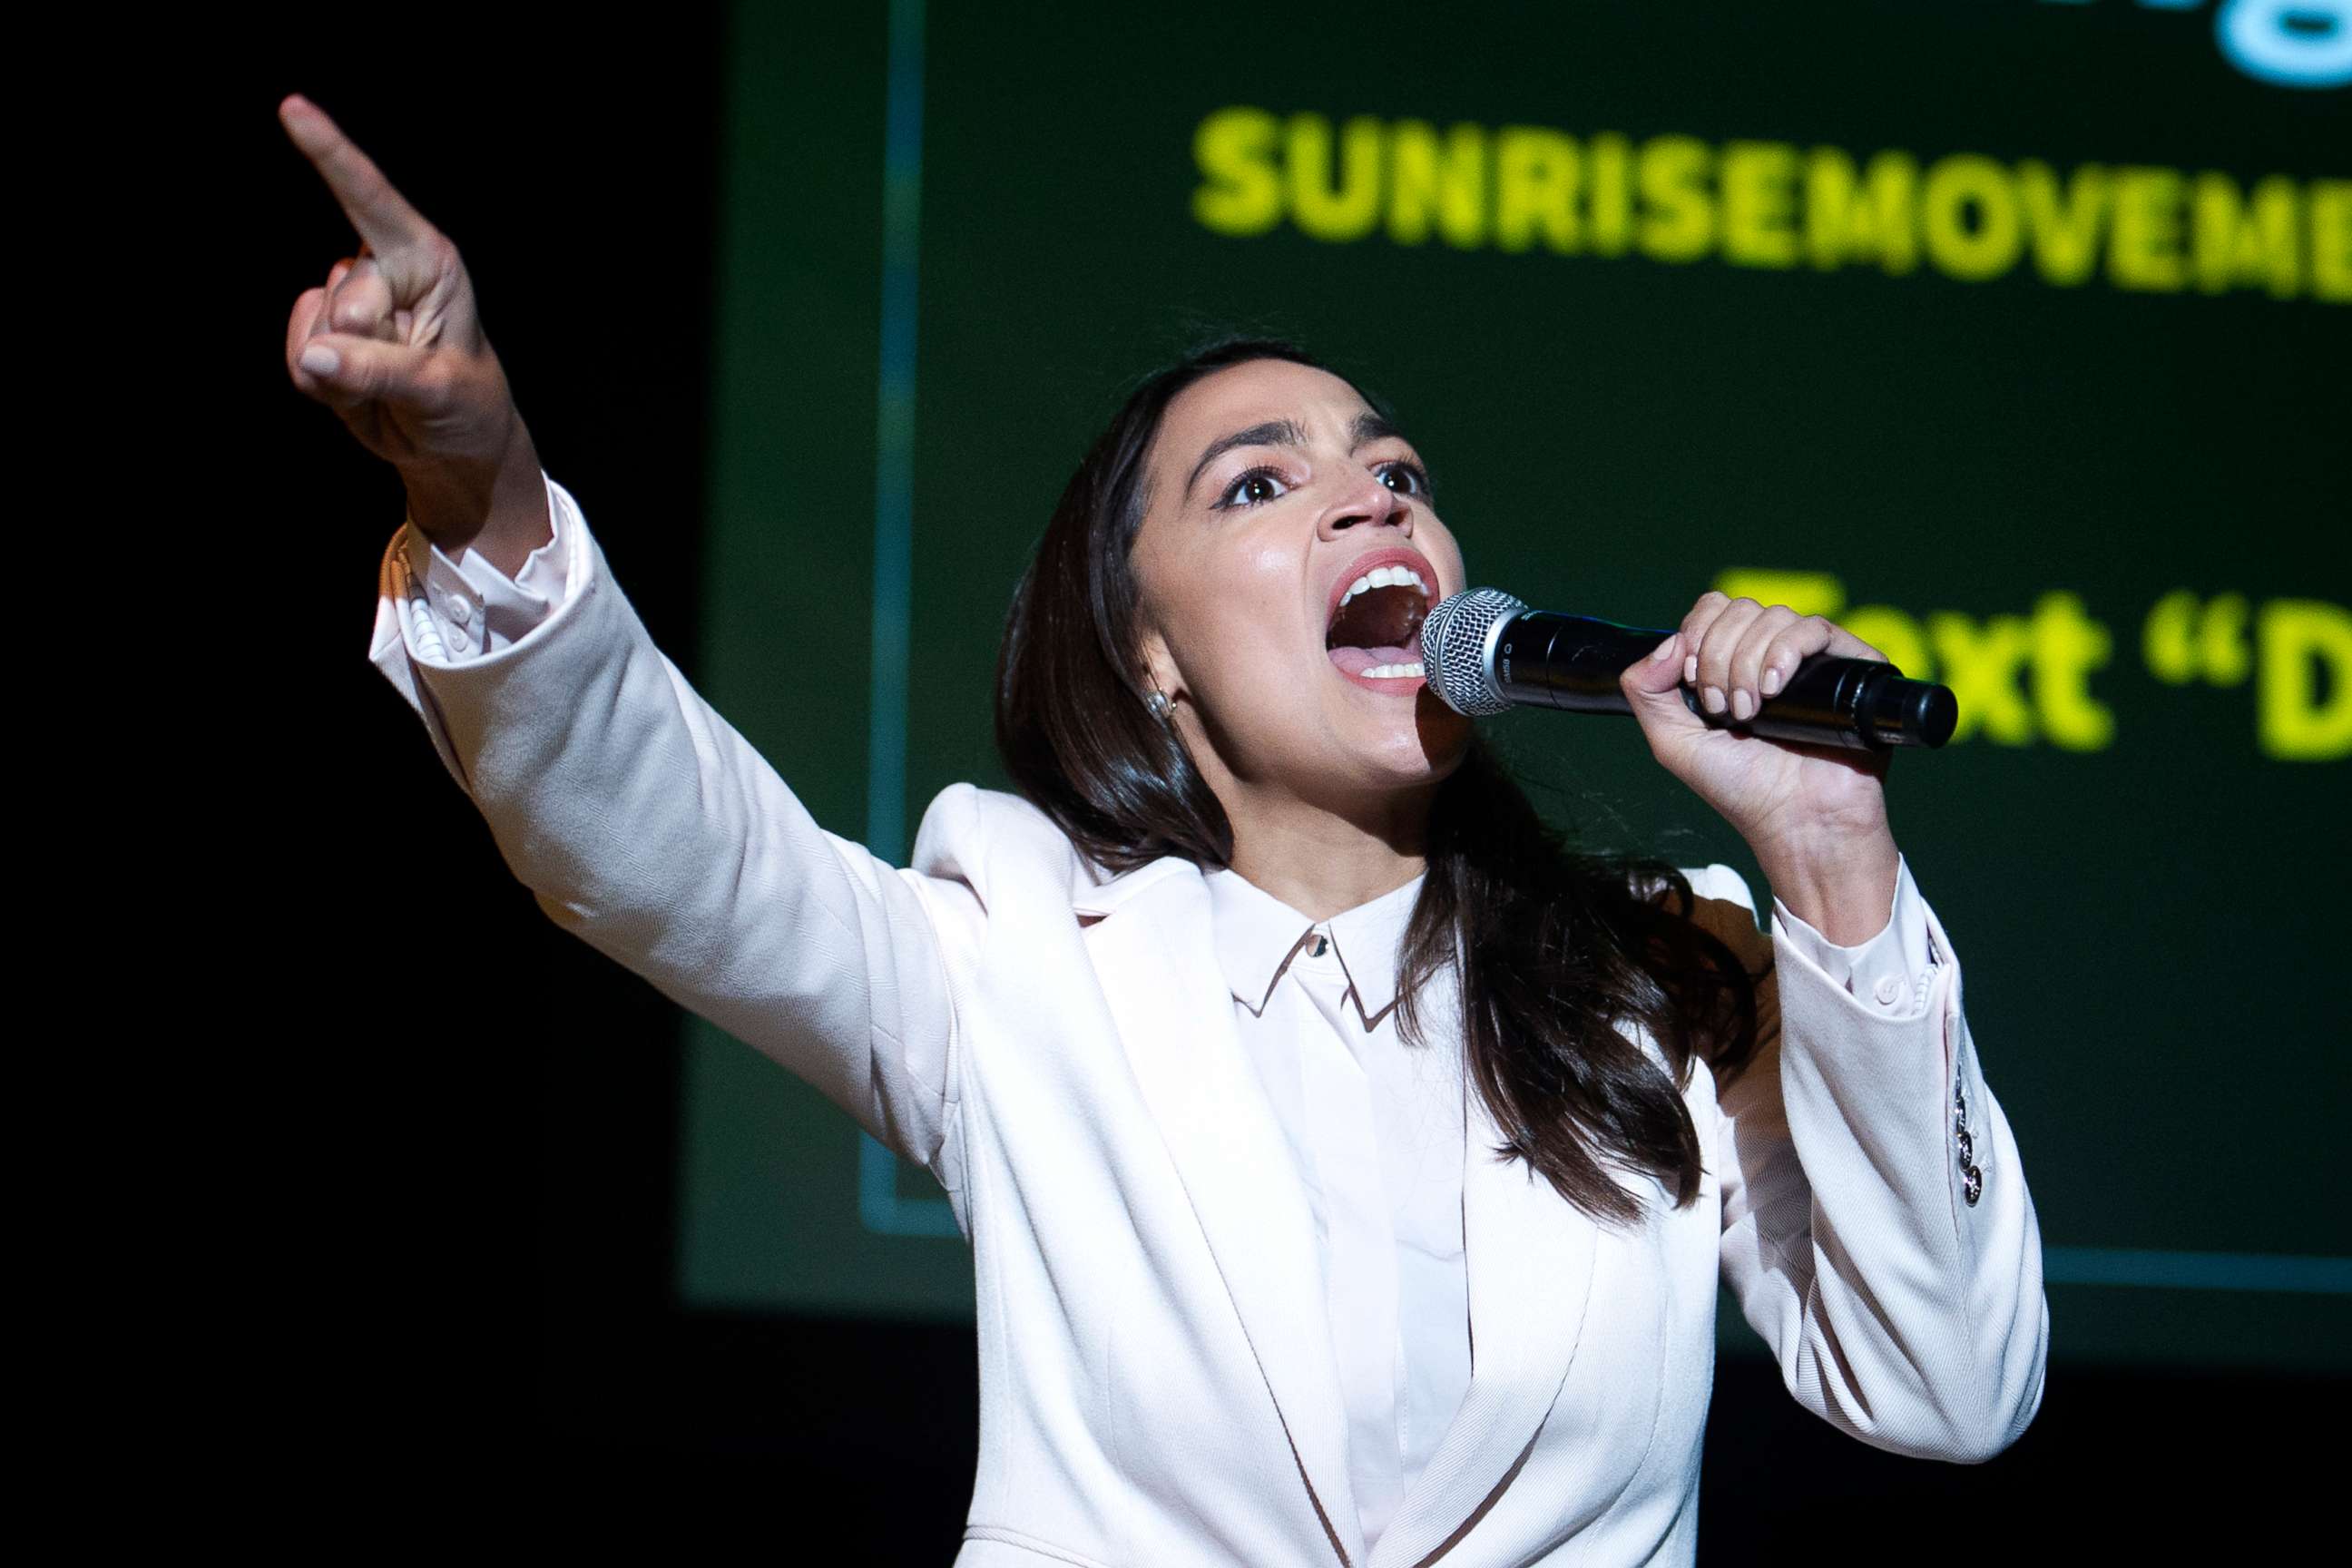 PHOTO:Rep. Alexandria Ocasio-Cortez, speaks at the final event for the Road to the Green New Deal Tour in Washington, D.C., Monday, May 13, 2019.